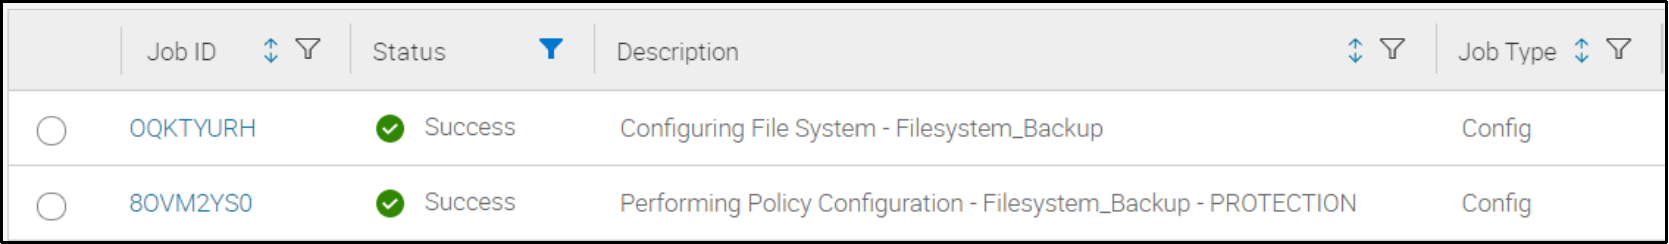 The image shows the successful policy configuration jobs for file system backup.